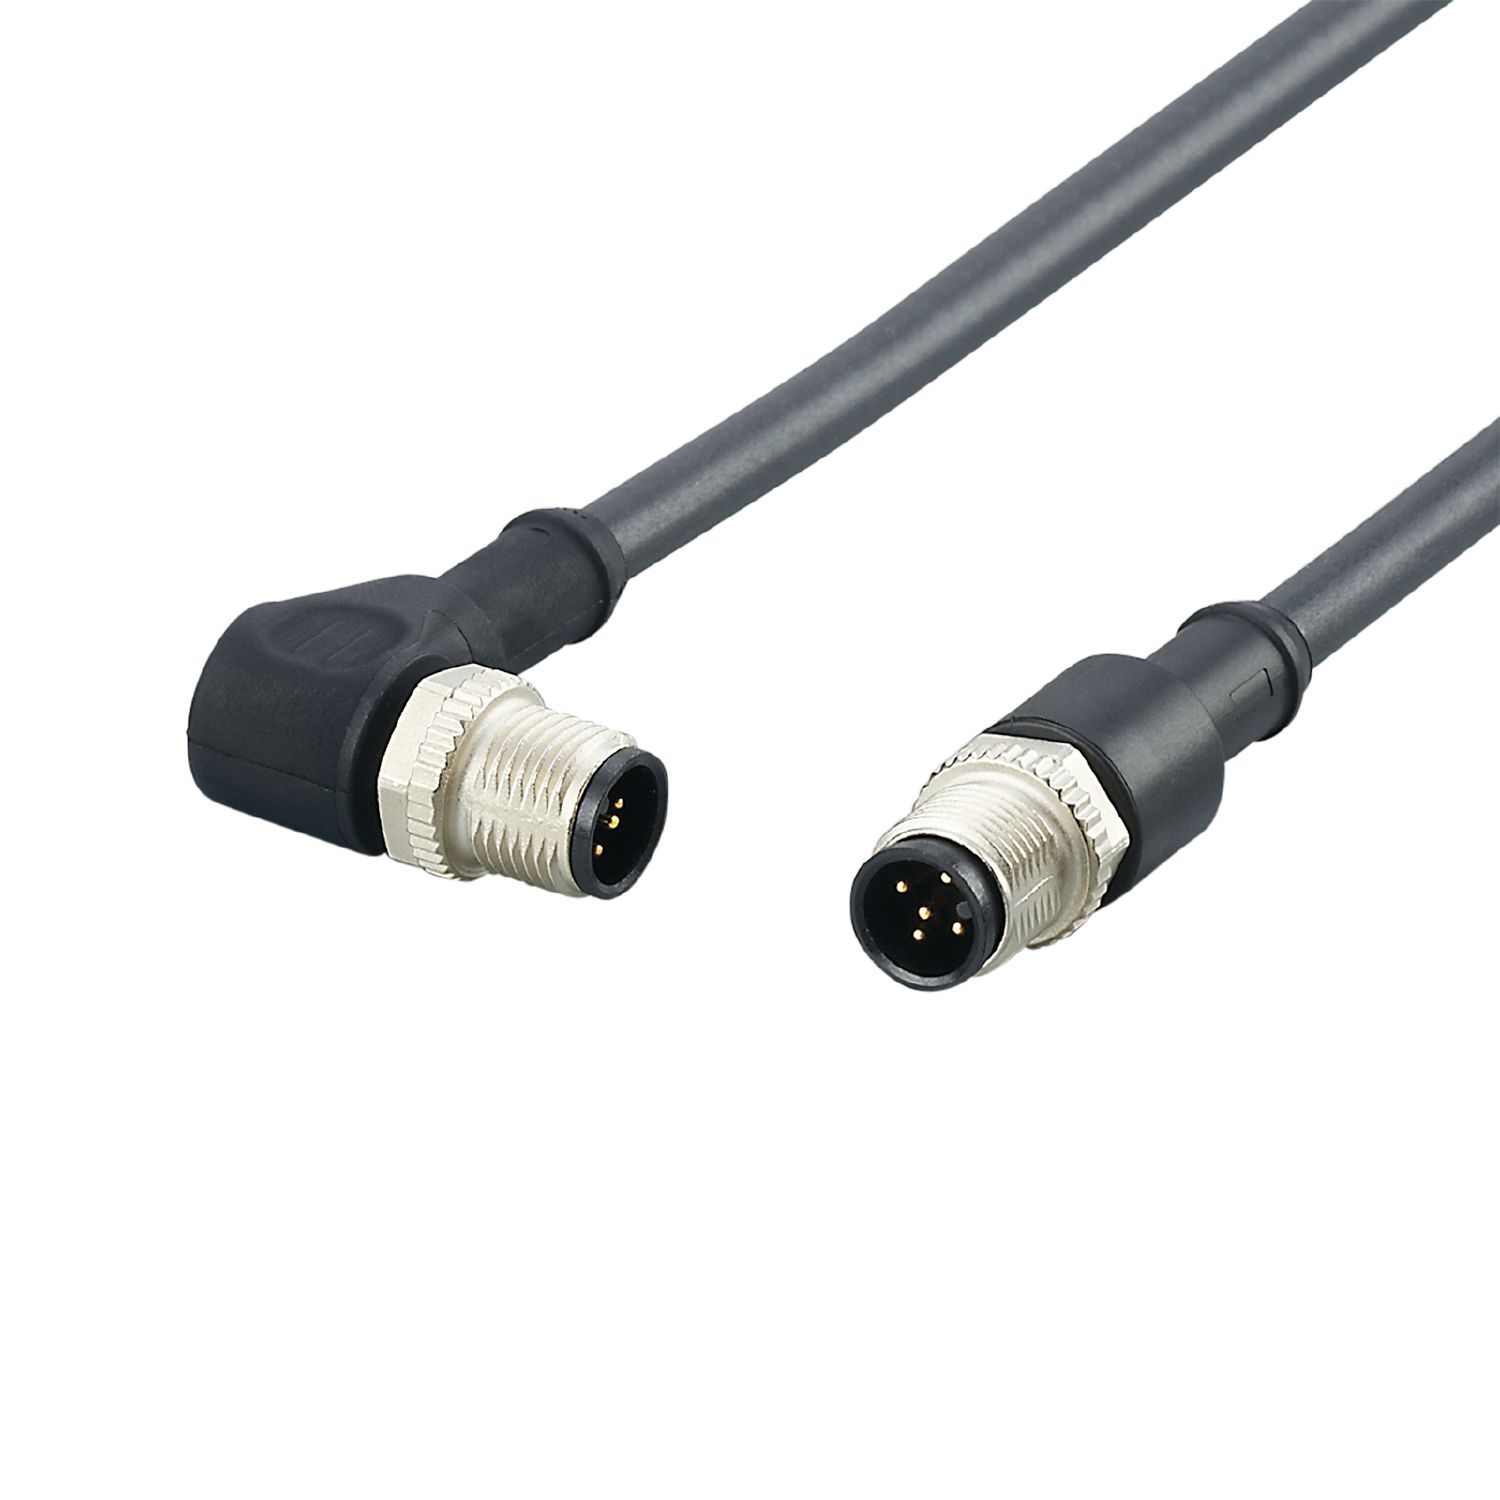 E3M152 - Connection cable - ifm